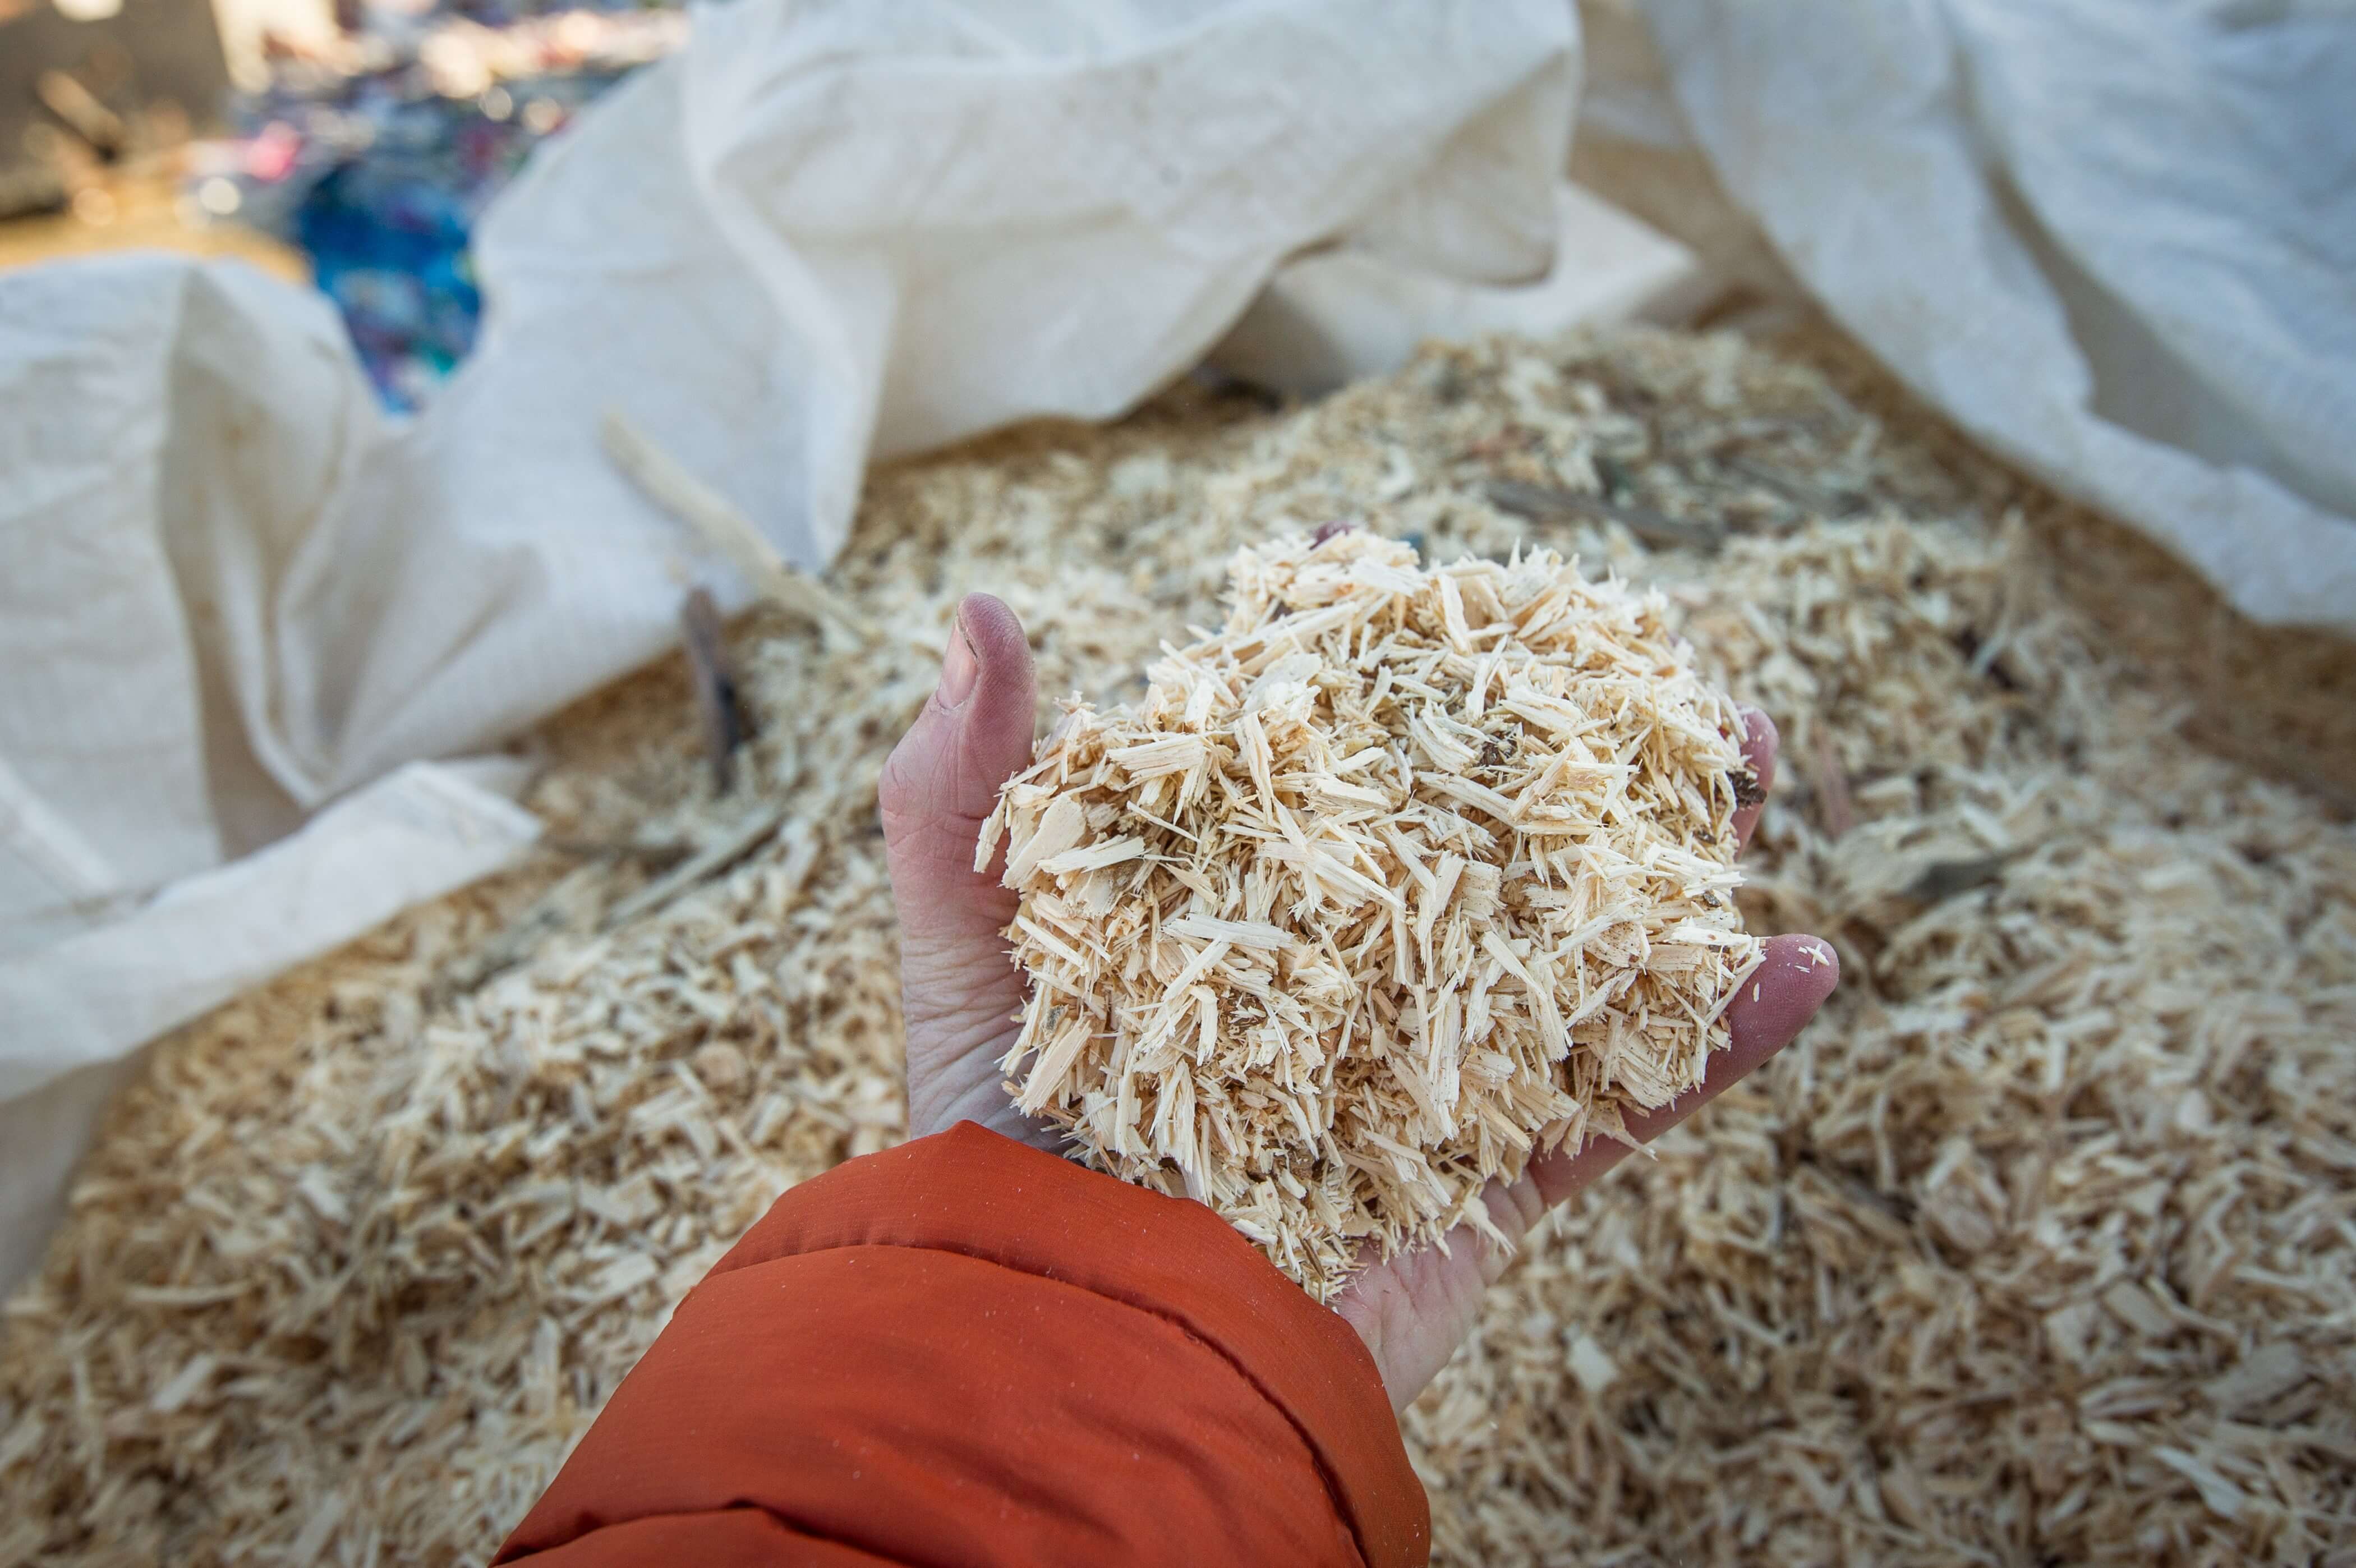 A hand holding wood chips